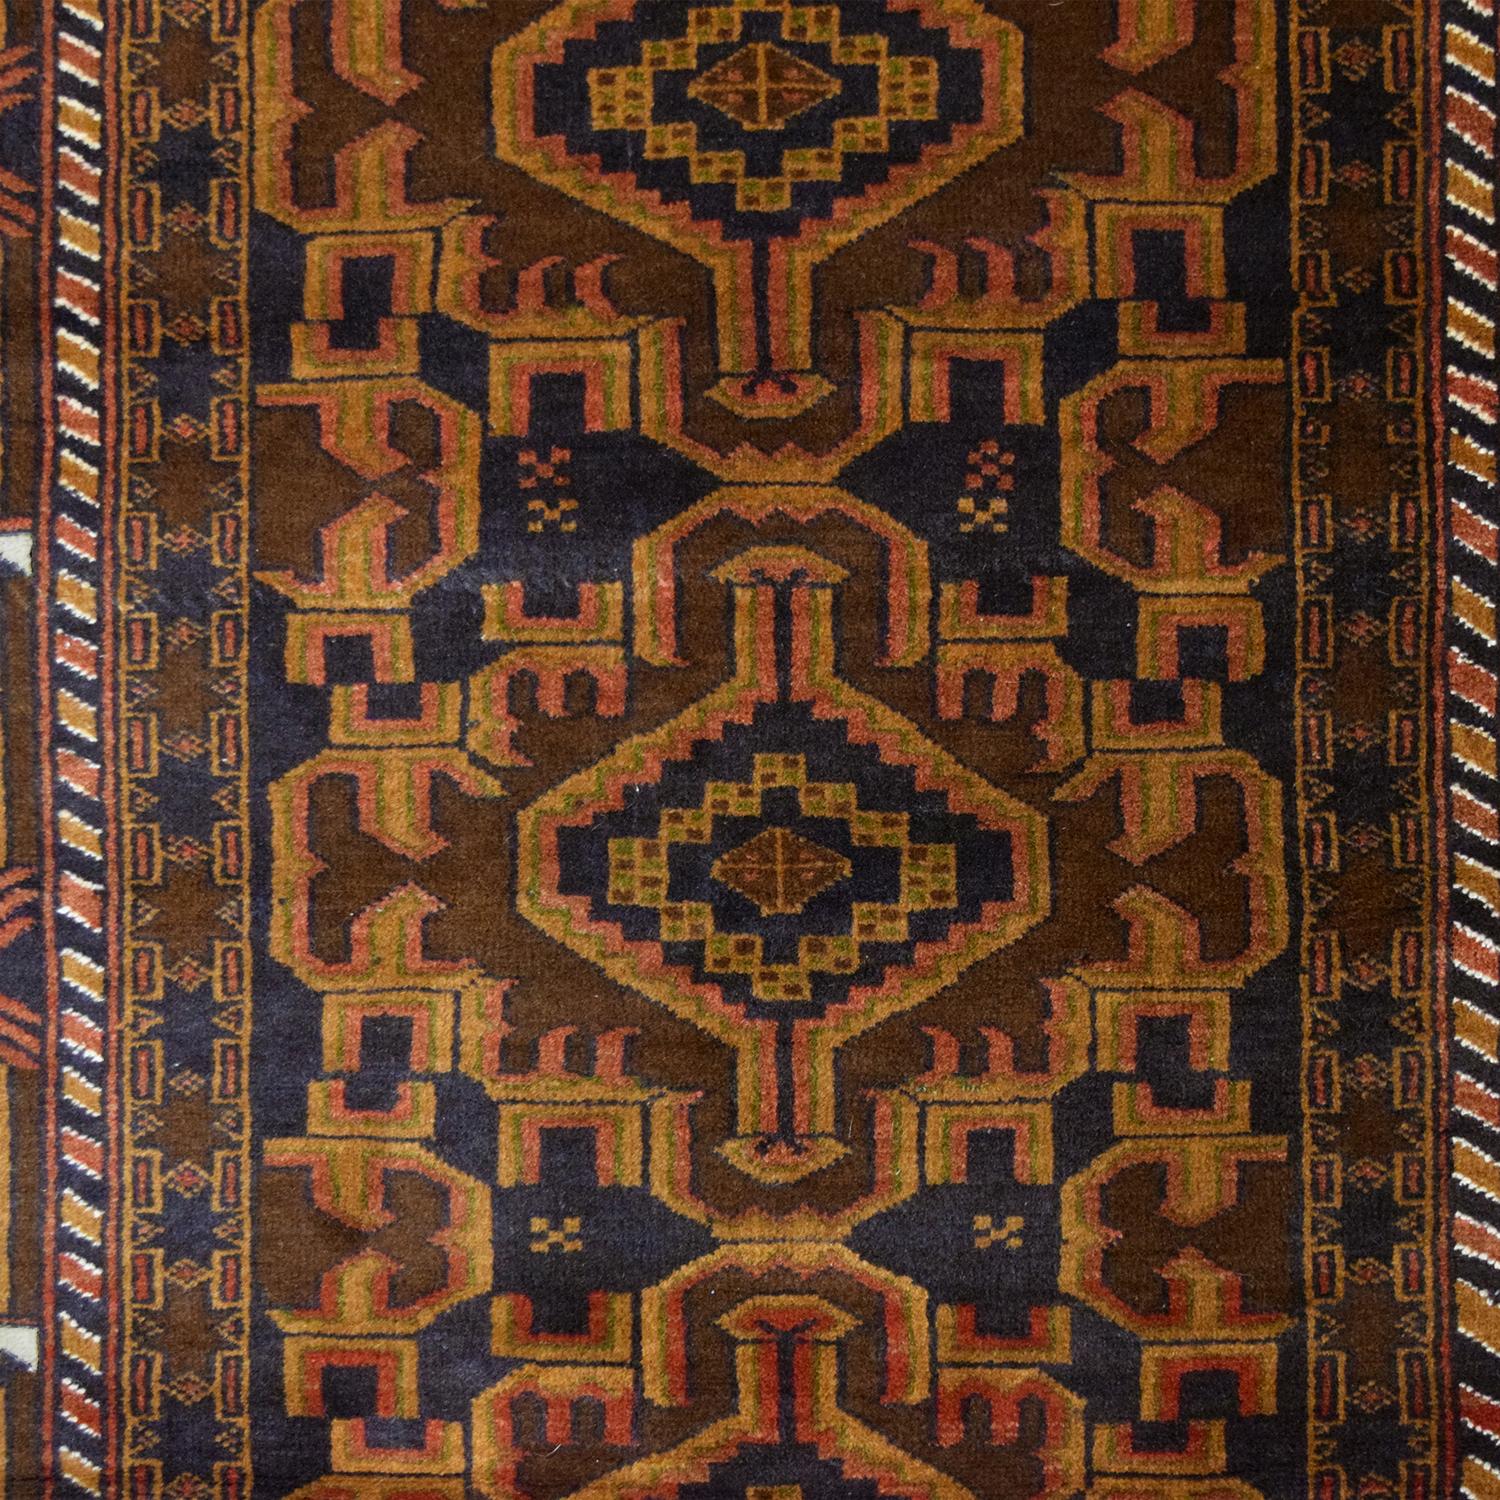 Tribal Traditional Persian Balouchi Carpet in Brown, Cream, and Black Wool 3’ x 4’7”